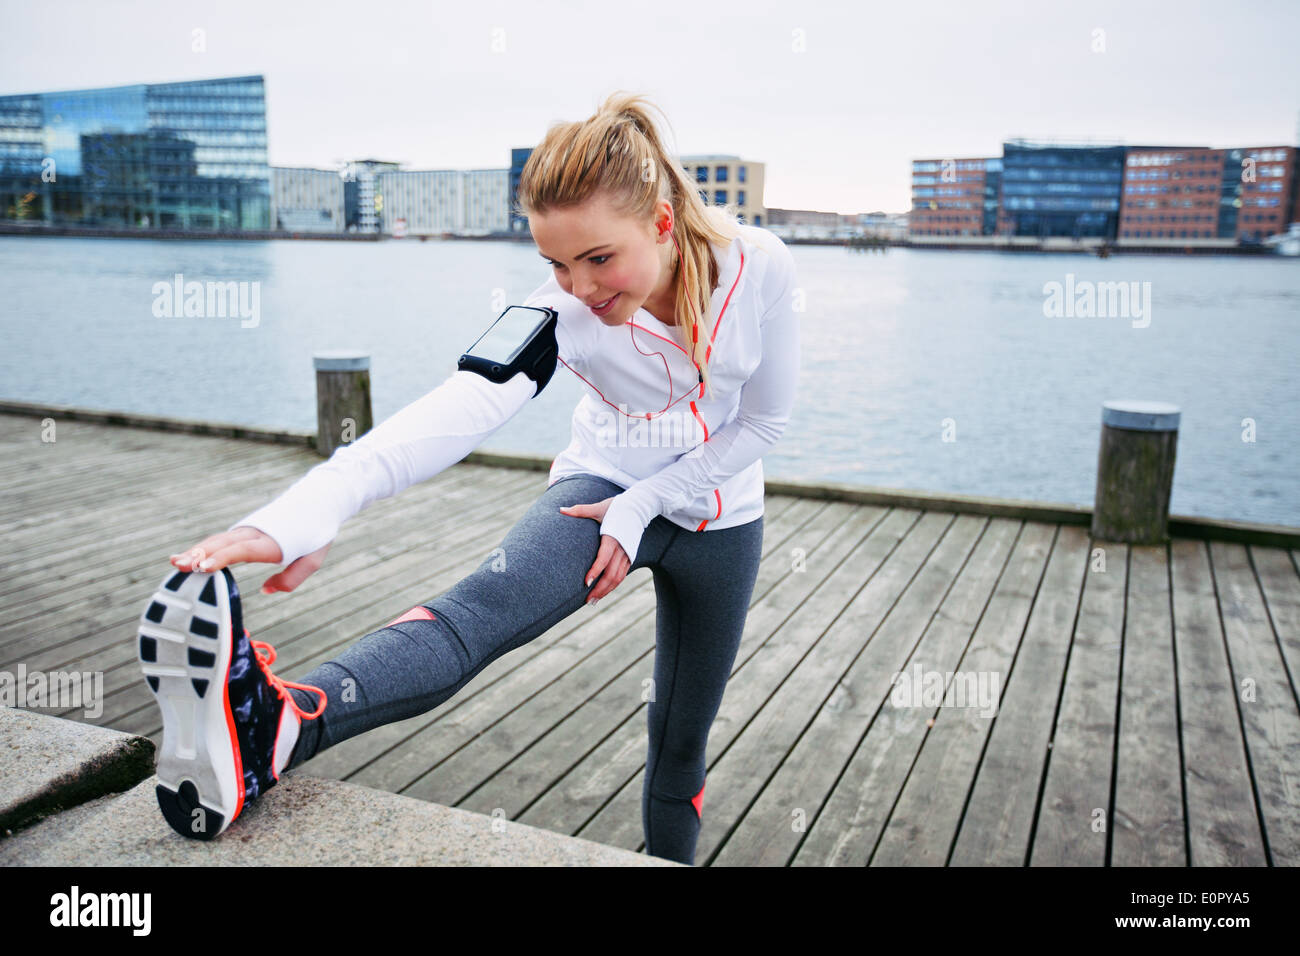 Fit young woman stretching avant une exécution. Young female runner stretching ses muscles avant une session de formation Banque D'Images